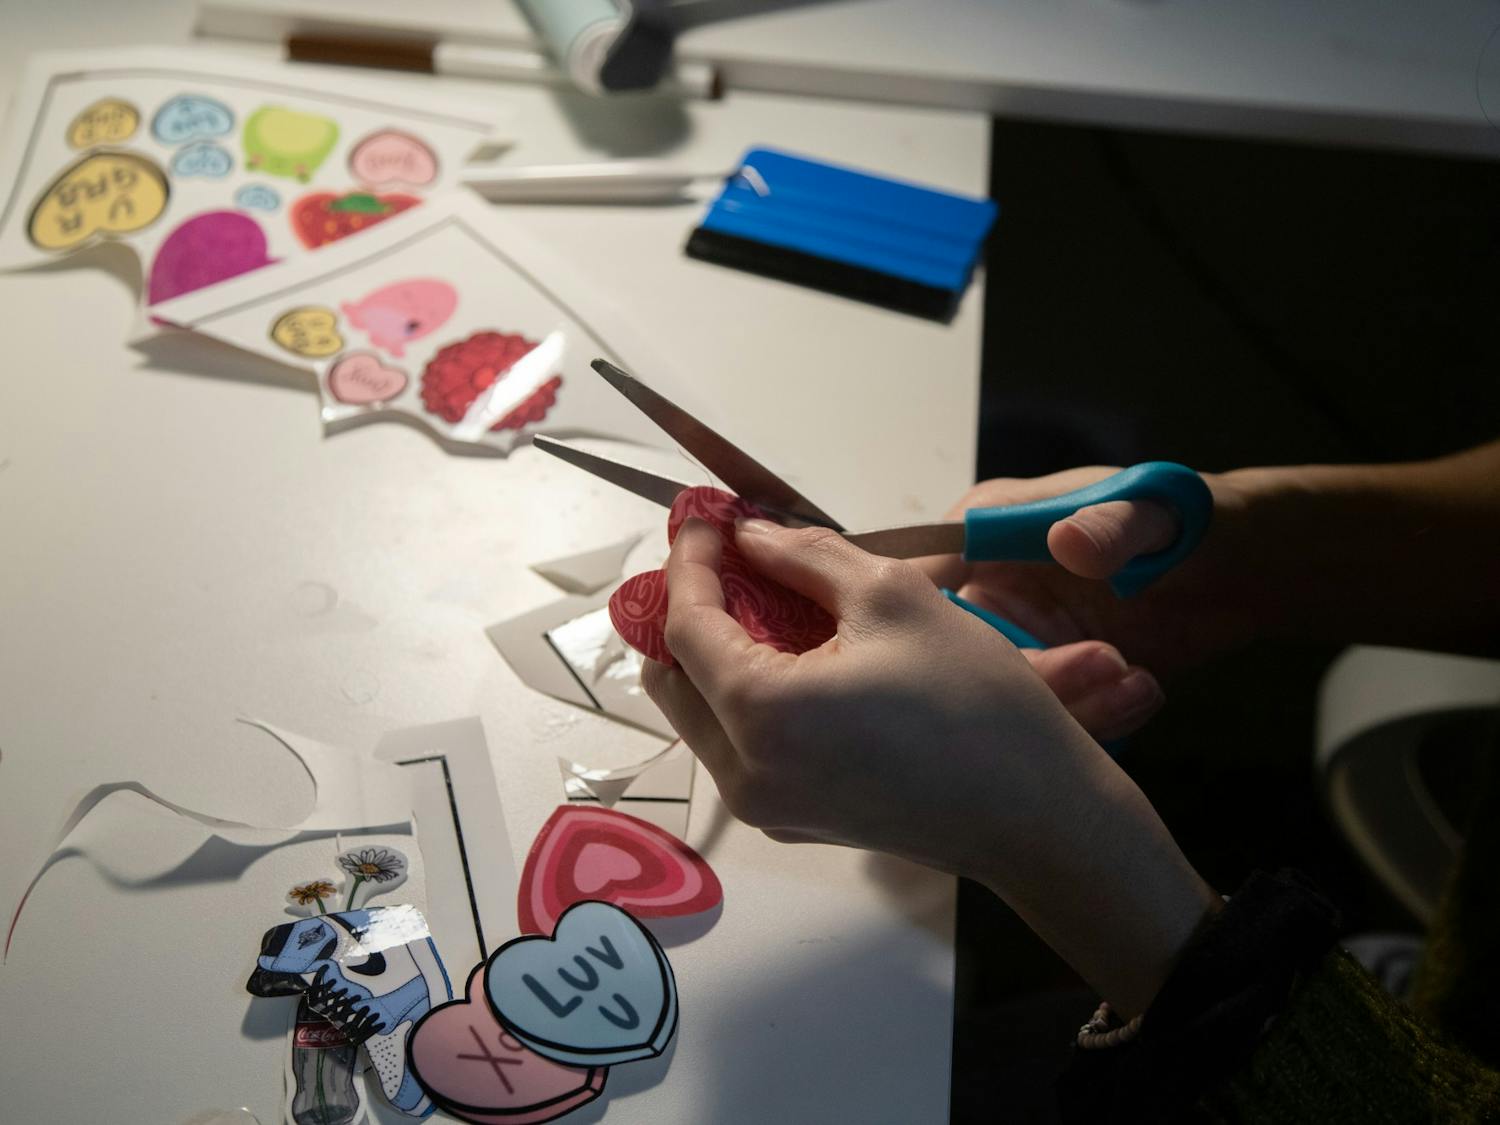 Senior Marina Carolina Fela-Castillo cuts out a heart sticker from her Valentine's Day collection on Monday, Feb. 15, 2021. Fela-Castillo is the owner and creative behind Pintamar.